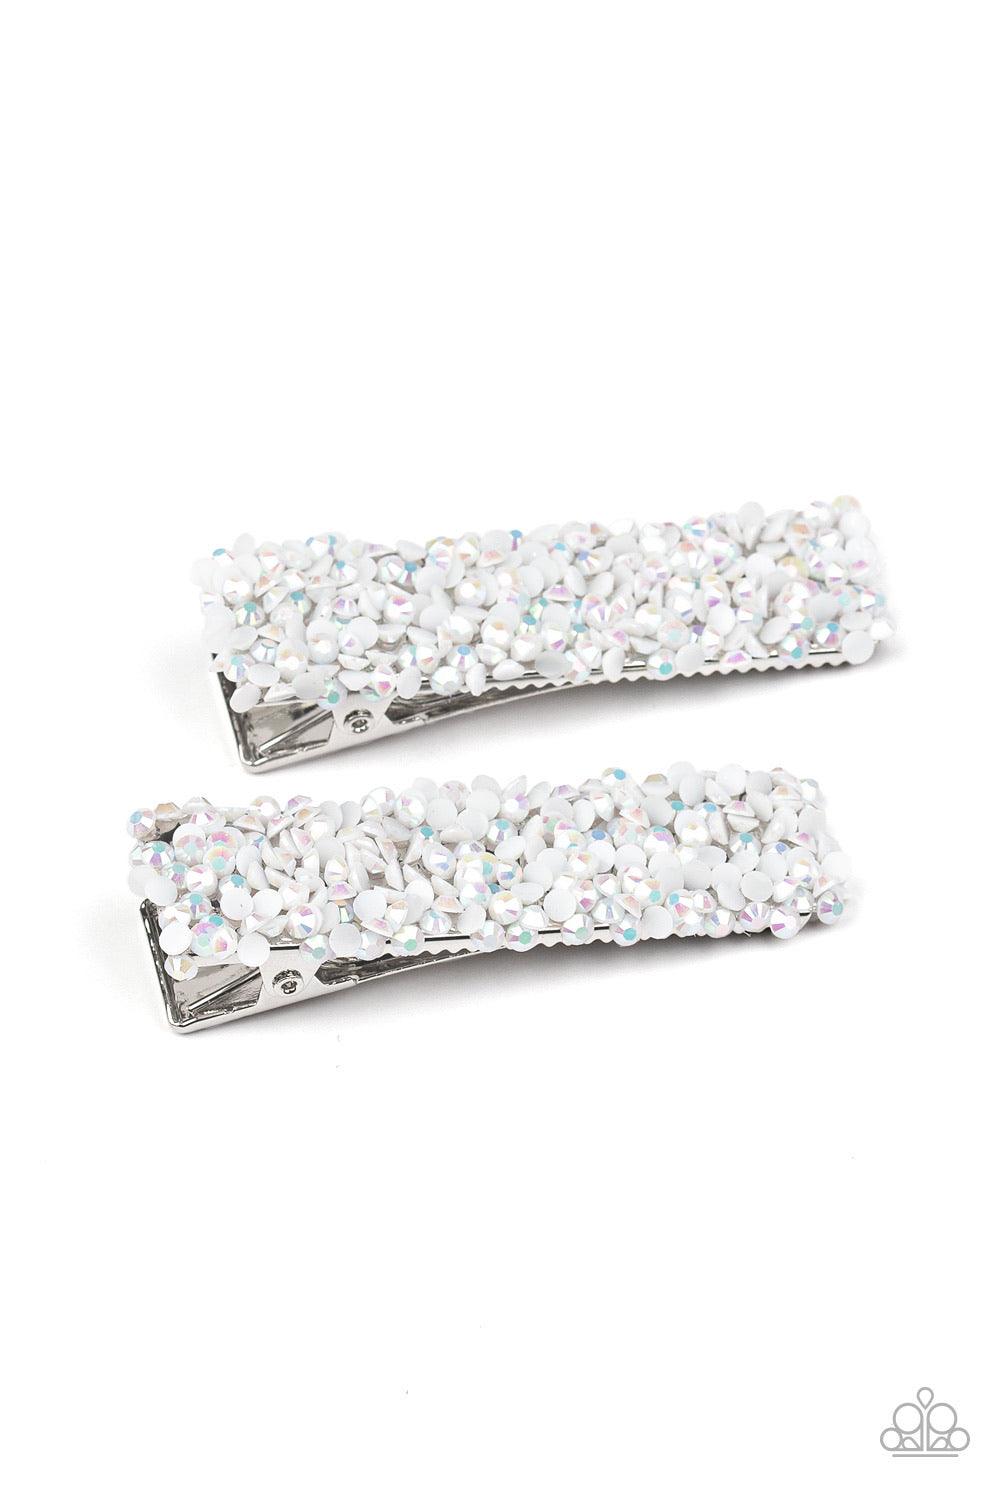 Paparazzi Accessories HAIR Comes Trouble - White Featuring a milky iridescence, dainty white rhinestones are sprinkled across two rectangular silver frames, creating a flirtatious pair of hair clips. Features a standard hair clip on the back. Sold as one